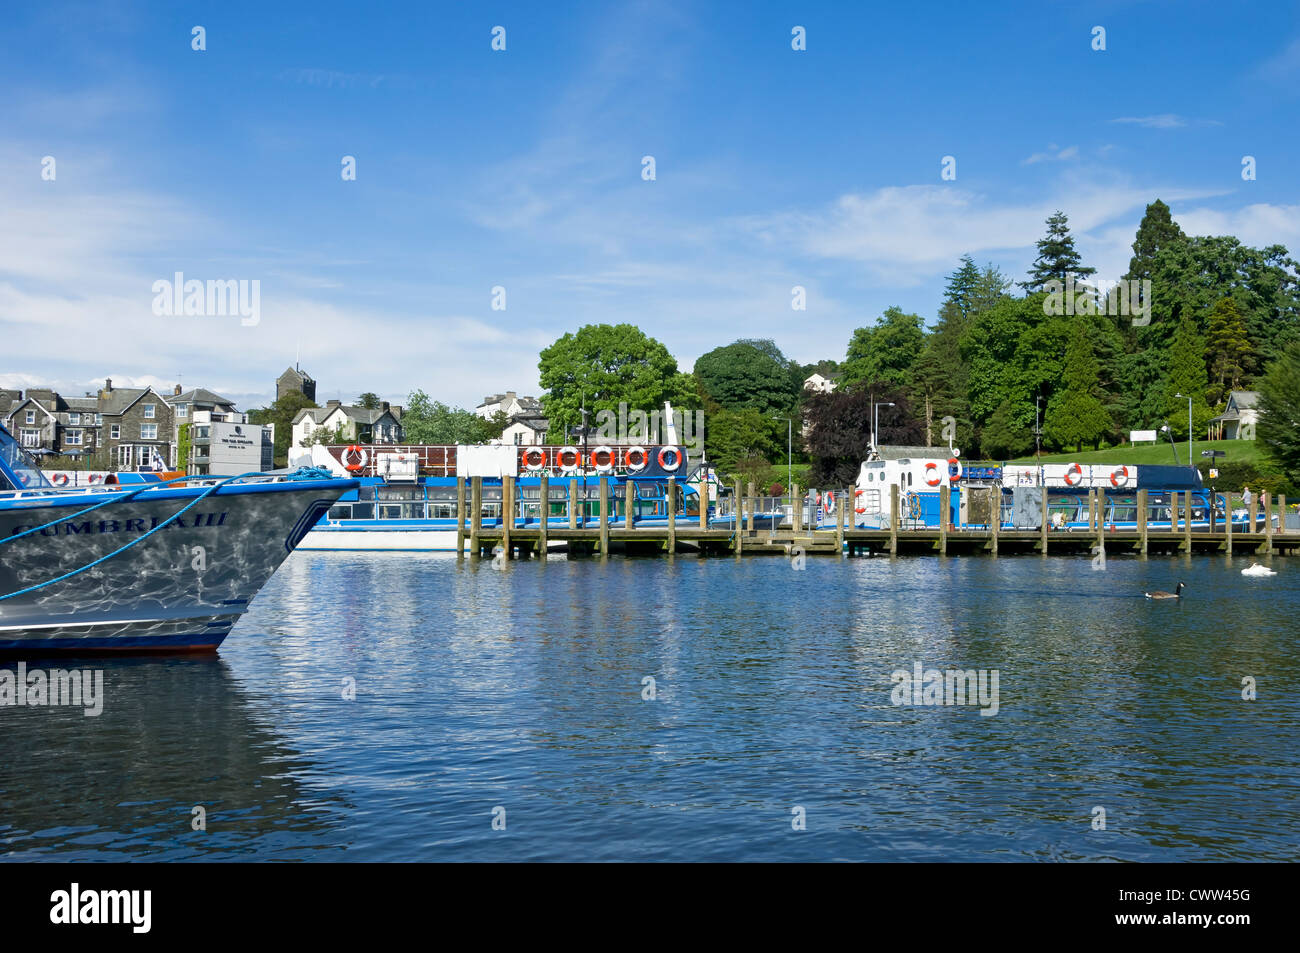 Pleasure boats on the lake in summer Bowness on Windermere Lake District National Park Cumbria England UK United Kingdom GB Great Britain Stock Photo